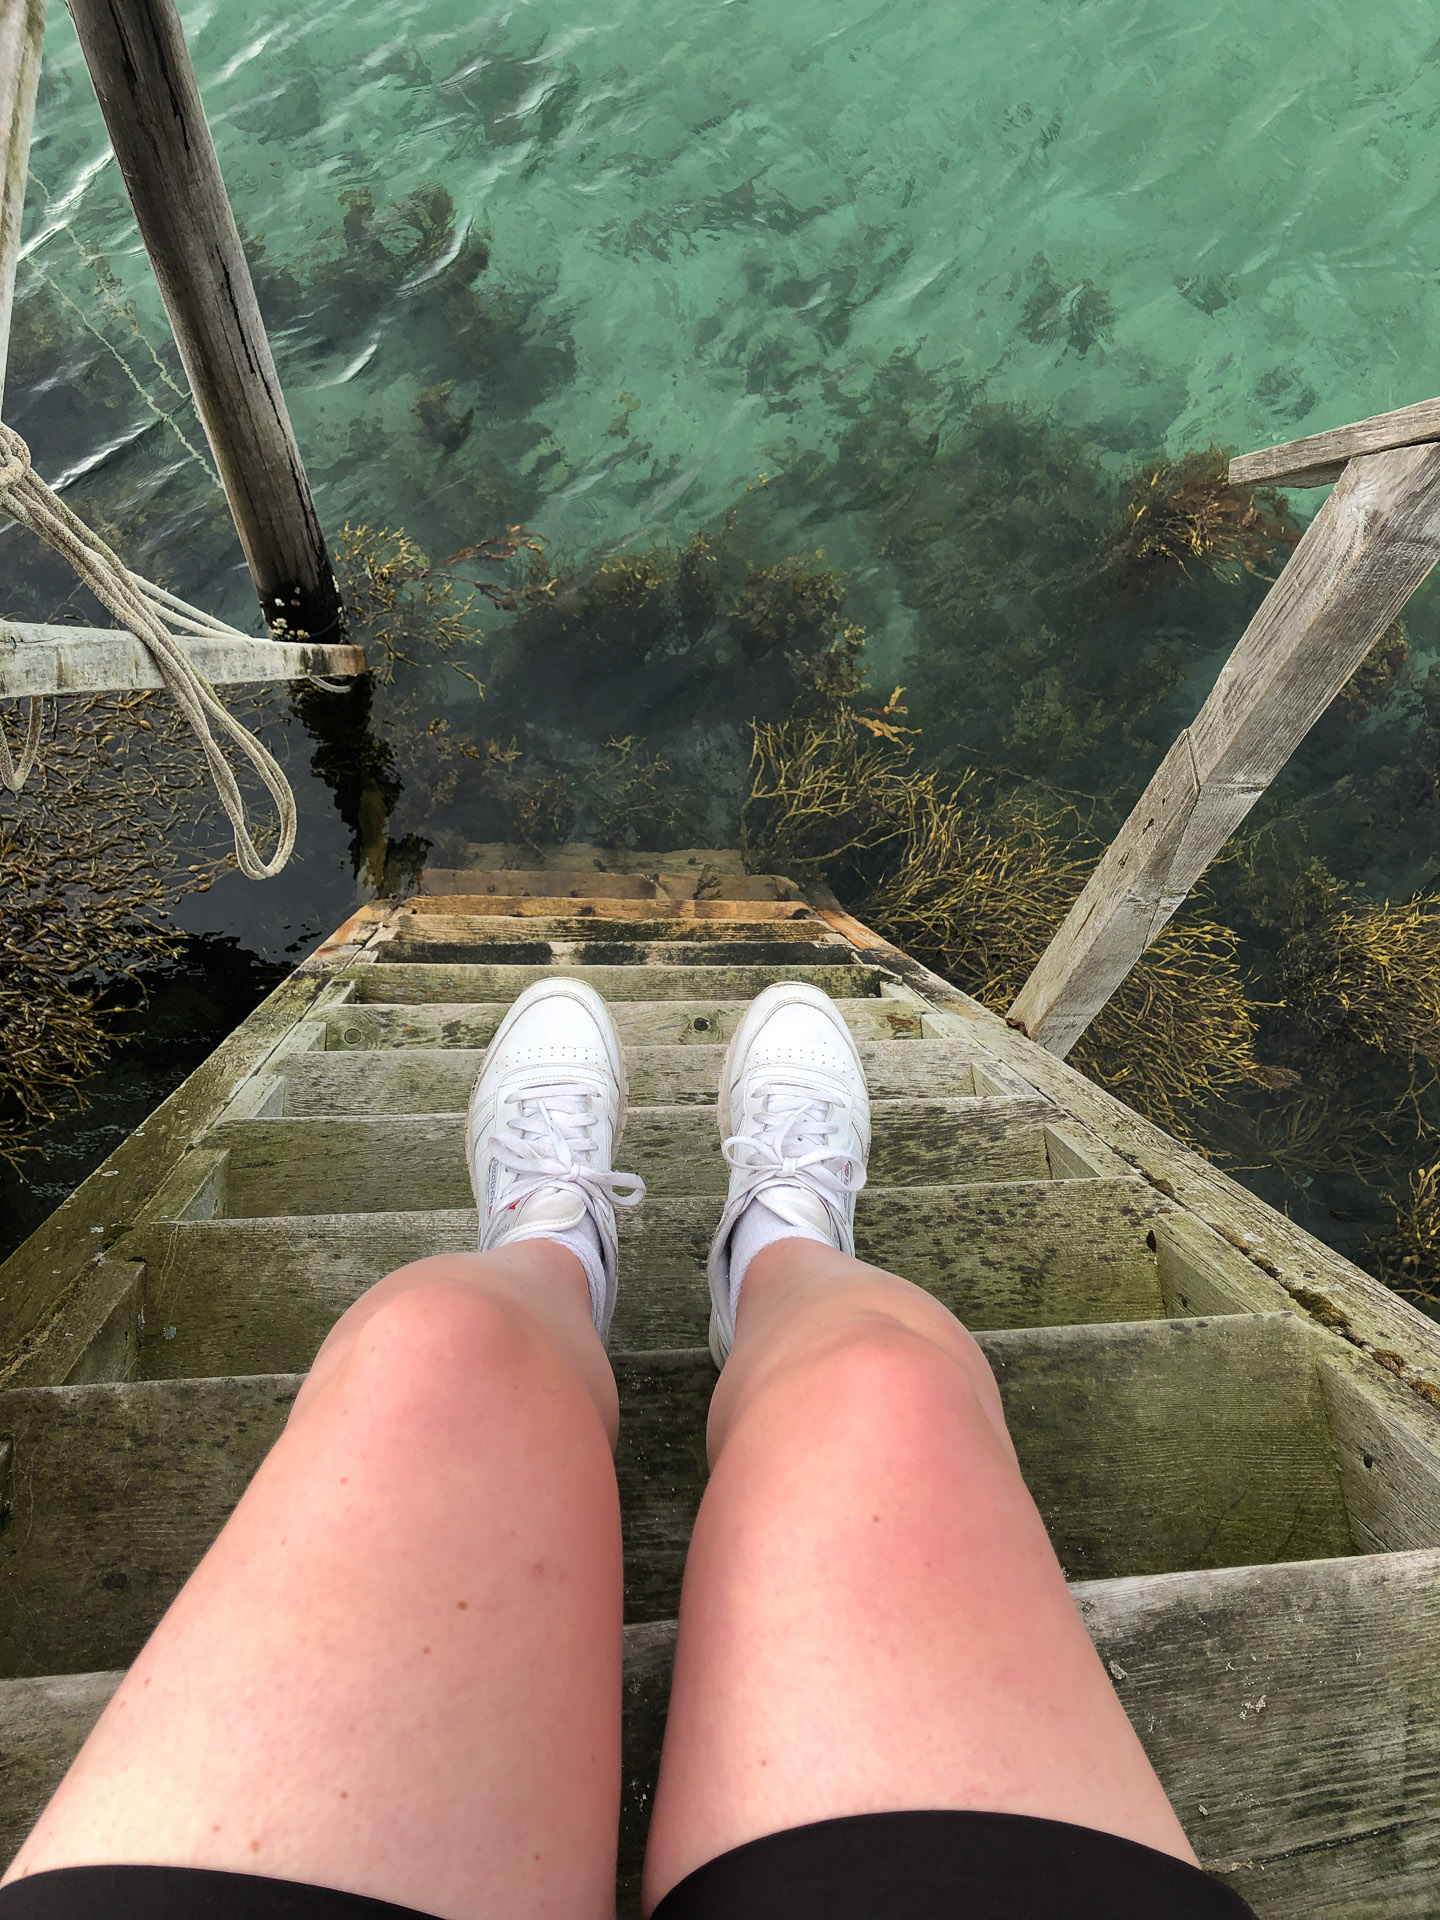 clear water and shorts at kjerringøy